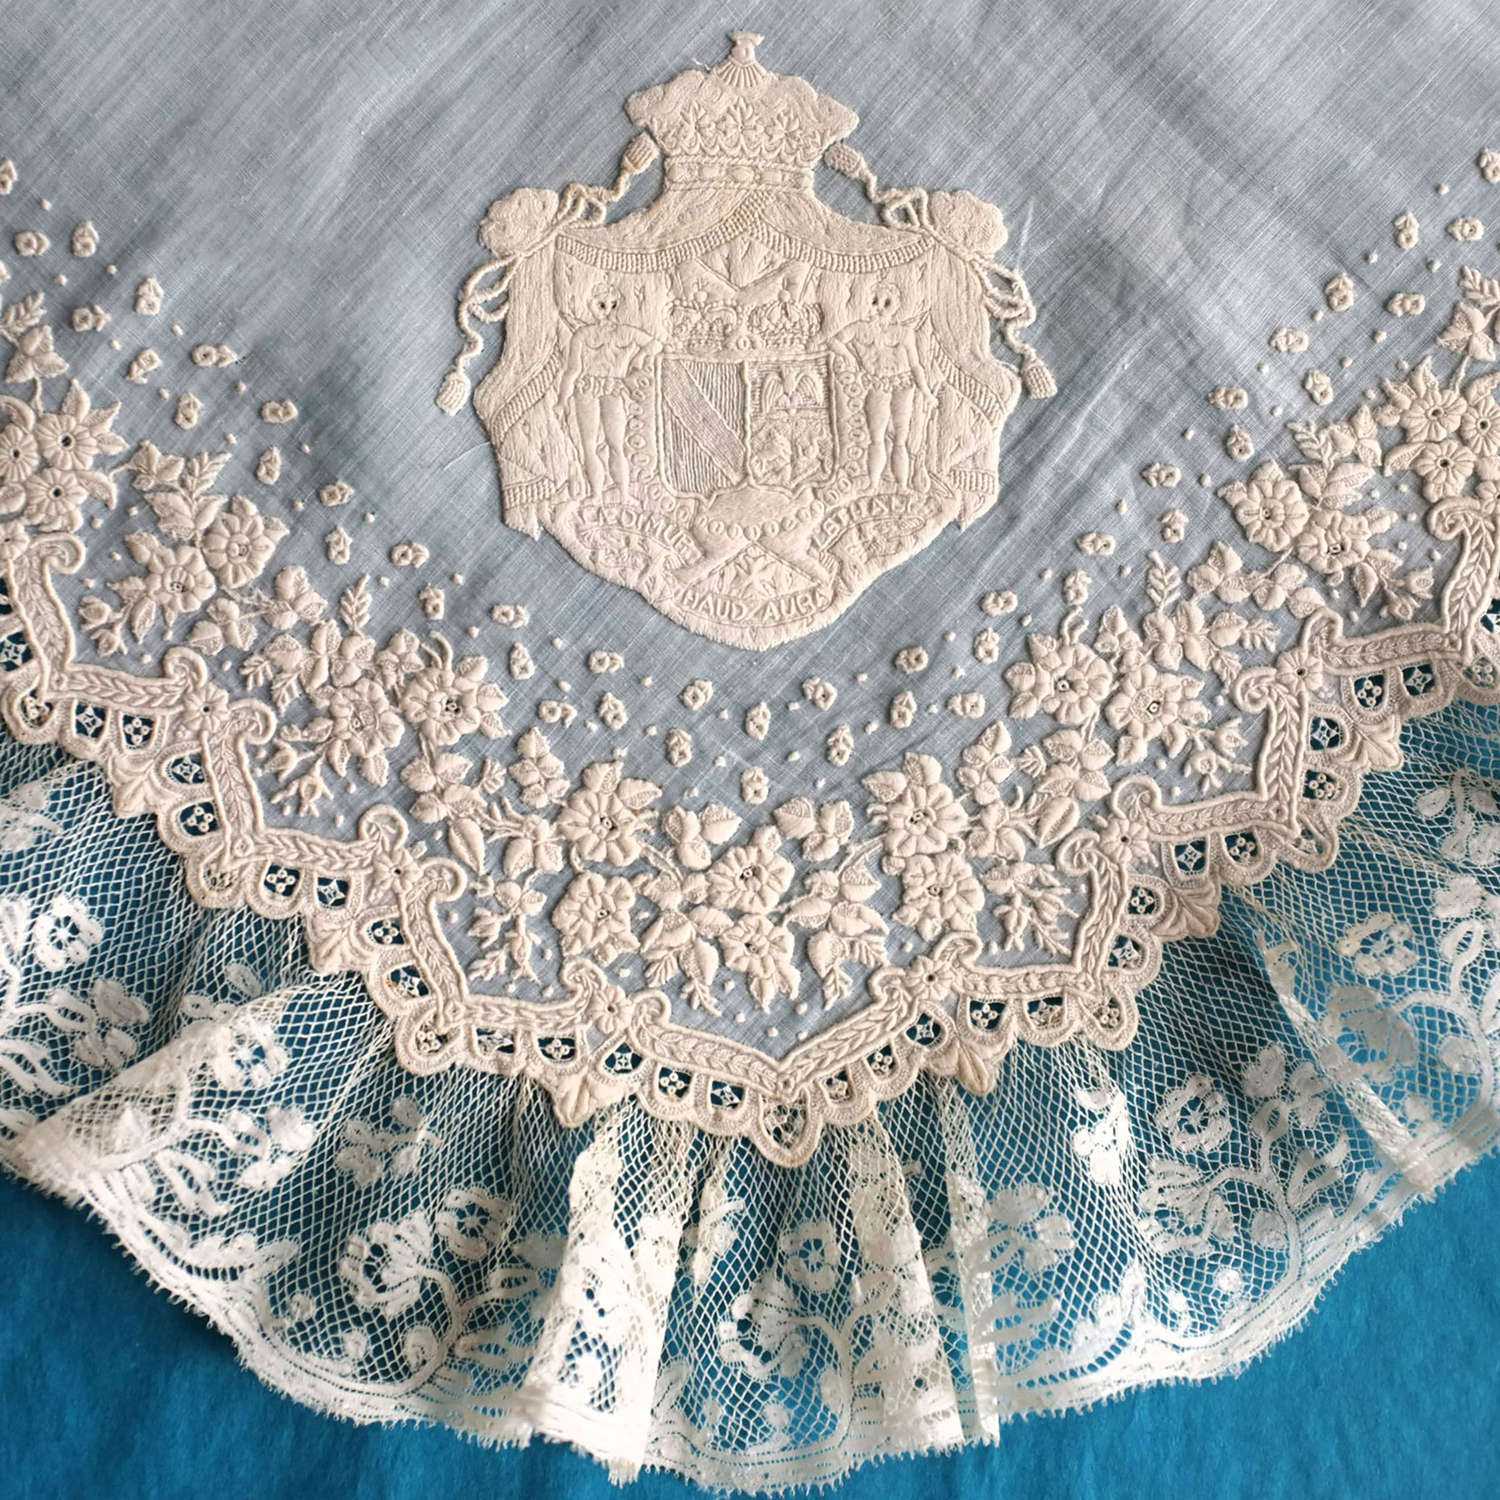 Antique Whitework Handkerchief with Crest and Coronets